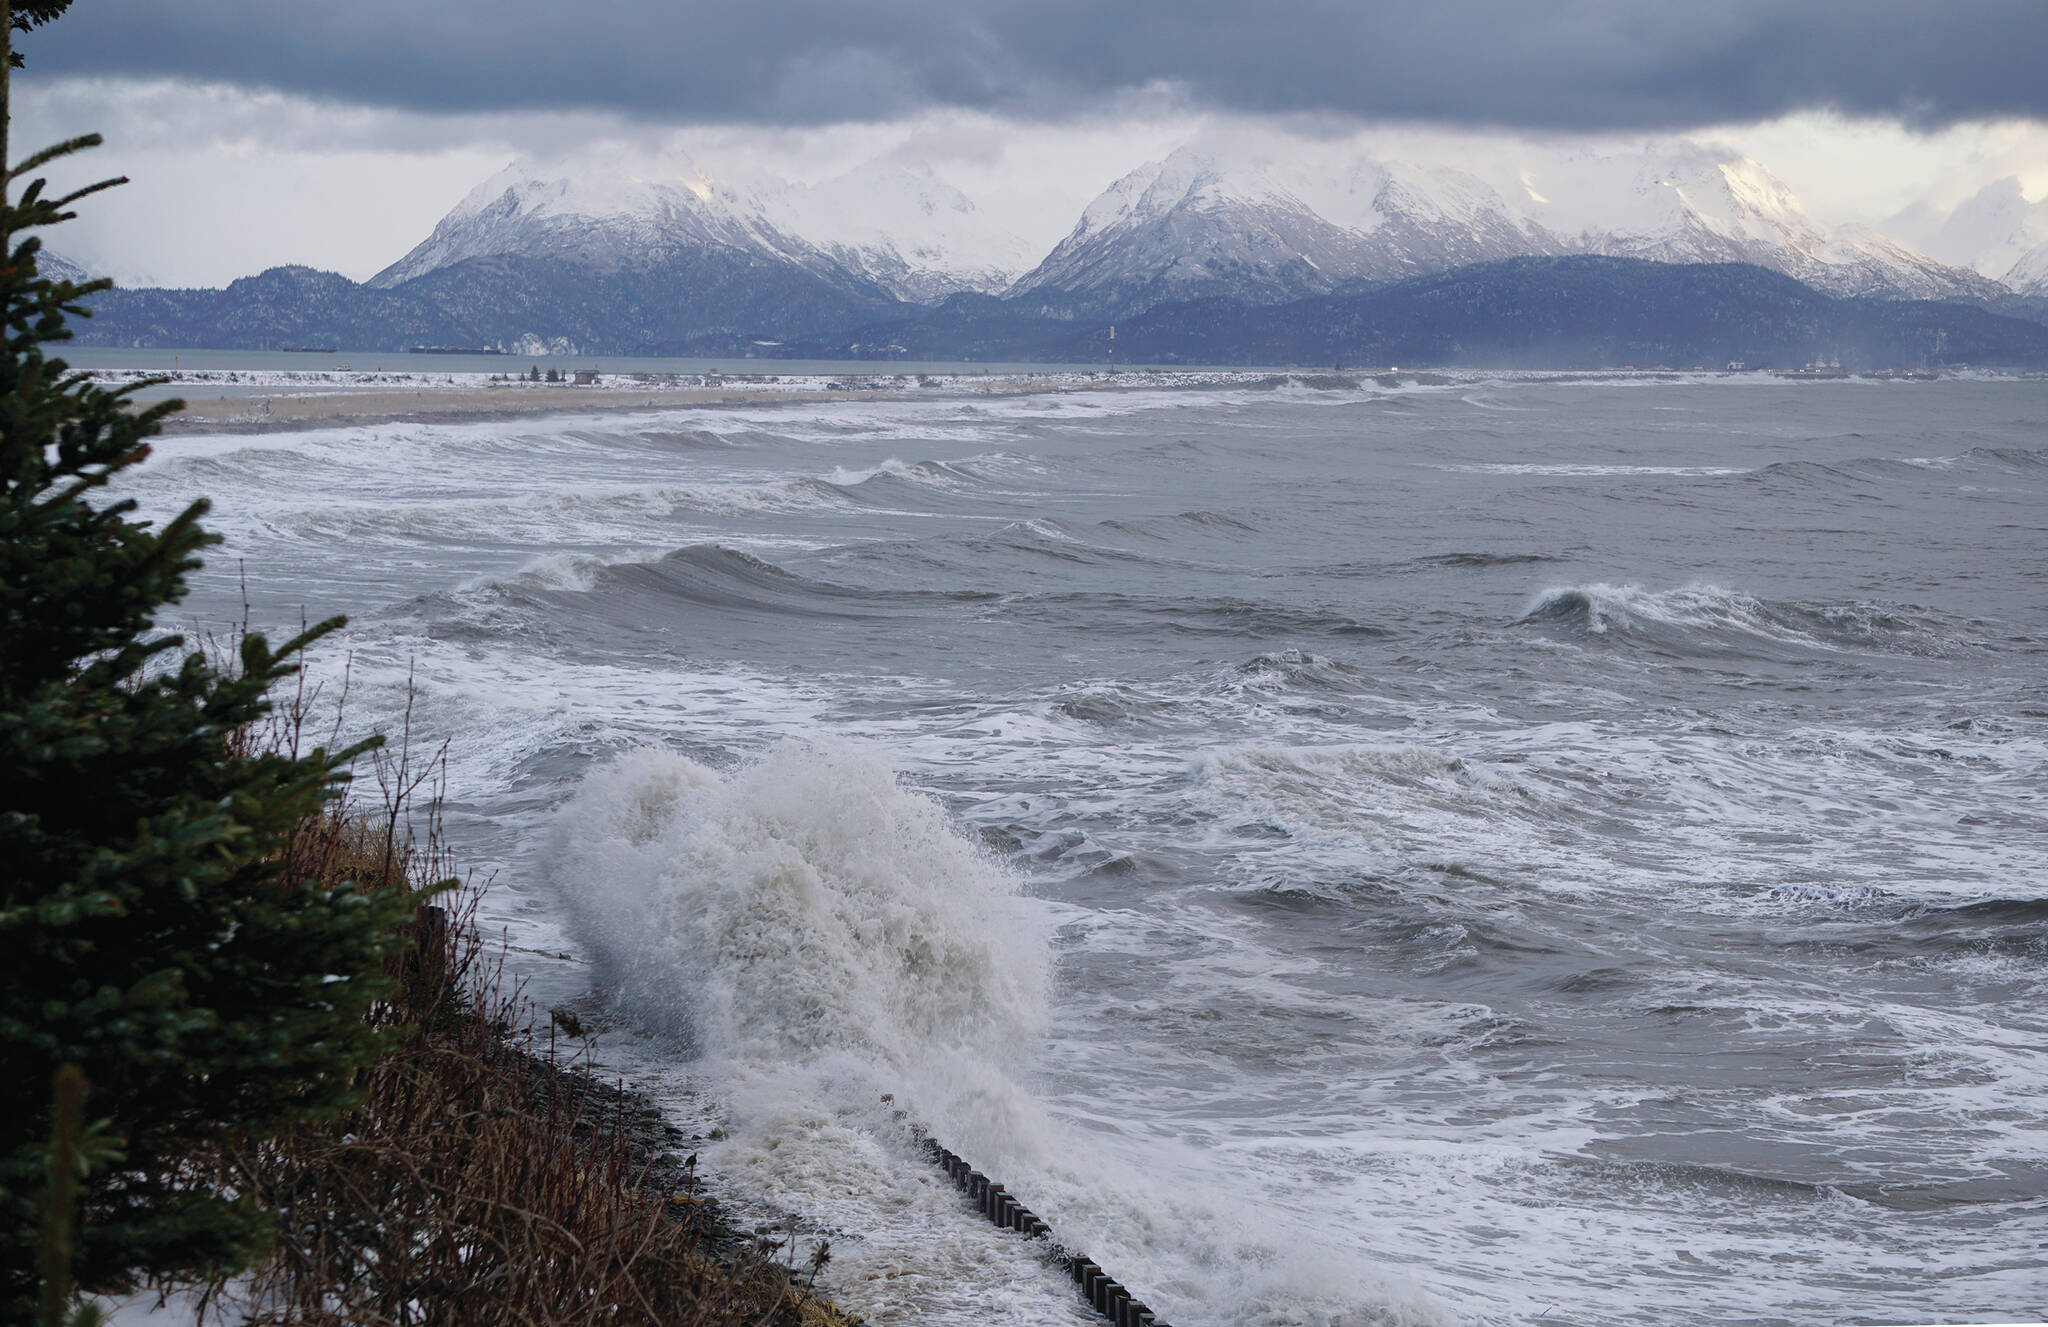 File photo by Michael Armstrong/Homer News
Waves crash against the Ocean Drive Loop seawall during a storm on the Homer Spit on Thursday, Dec. 26, 2019, in Homer, Alaska.